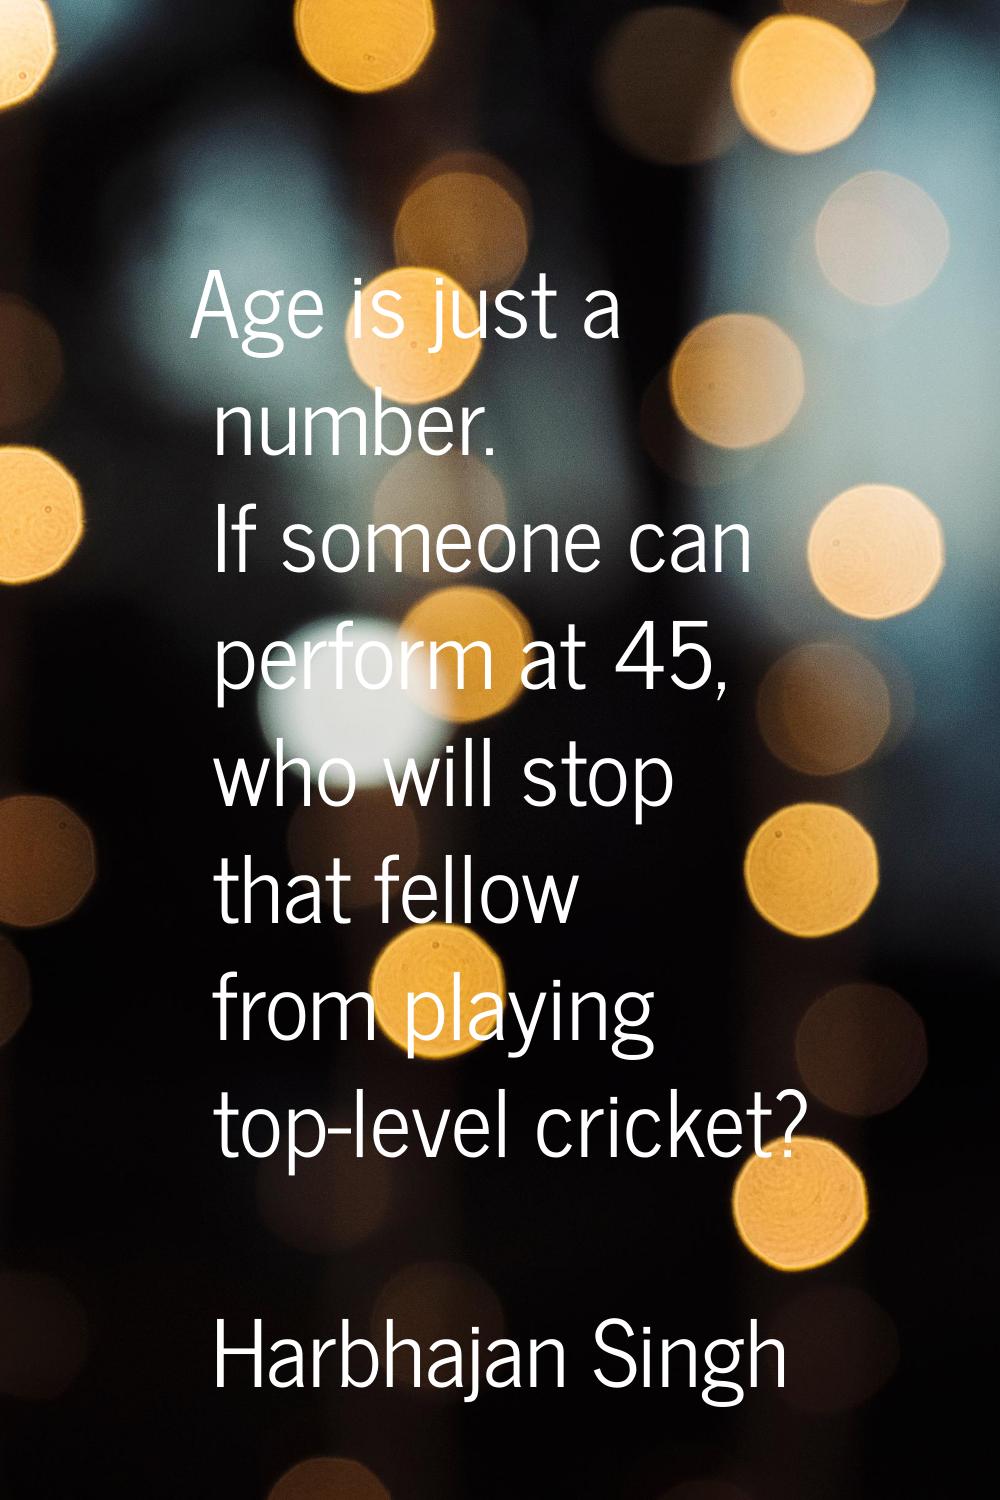 Age is just a number. If someone can perform at 45, who will stop that fellow from playing top-leve